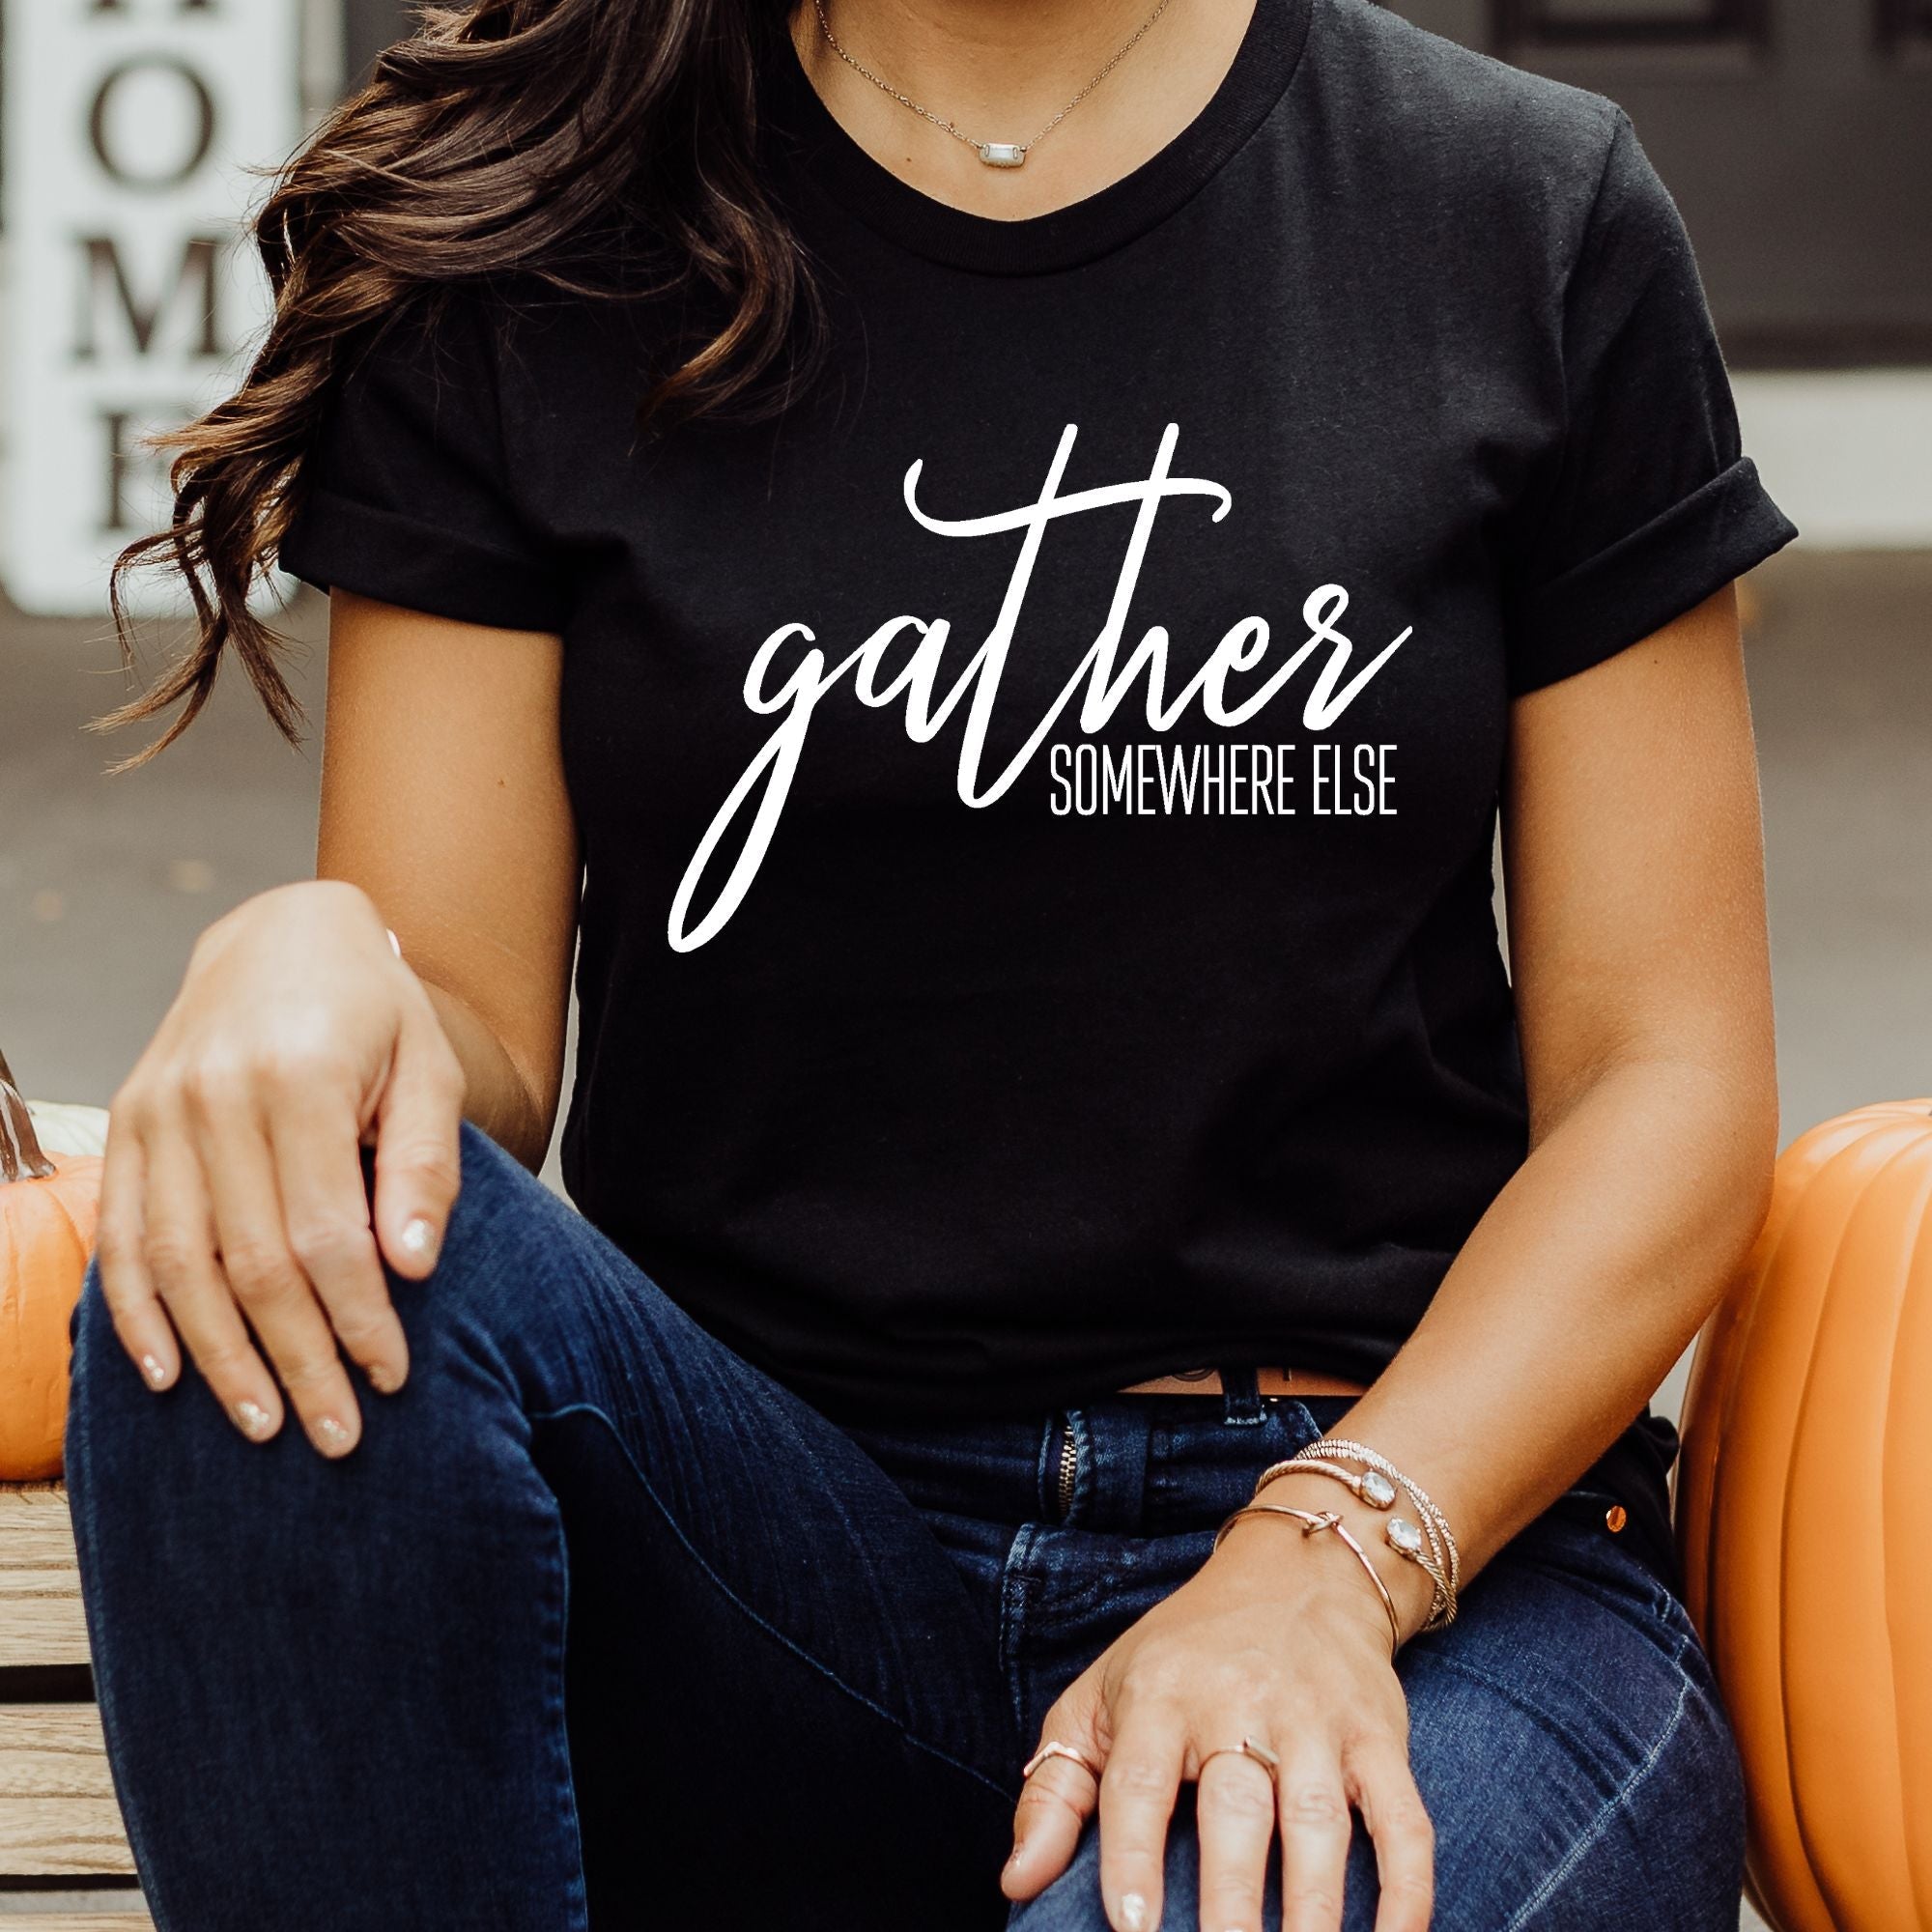 Gather *Somewhere Else* TShirt for Women Funny Thanksgiving Graphic Tee *UNISEX FIT*-208 Tees Wholesale, Idaho